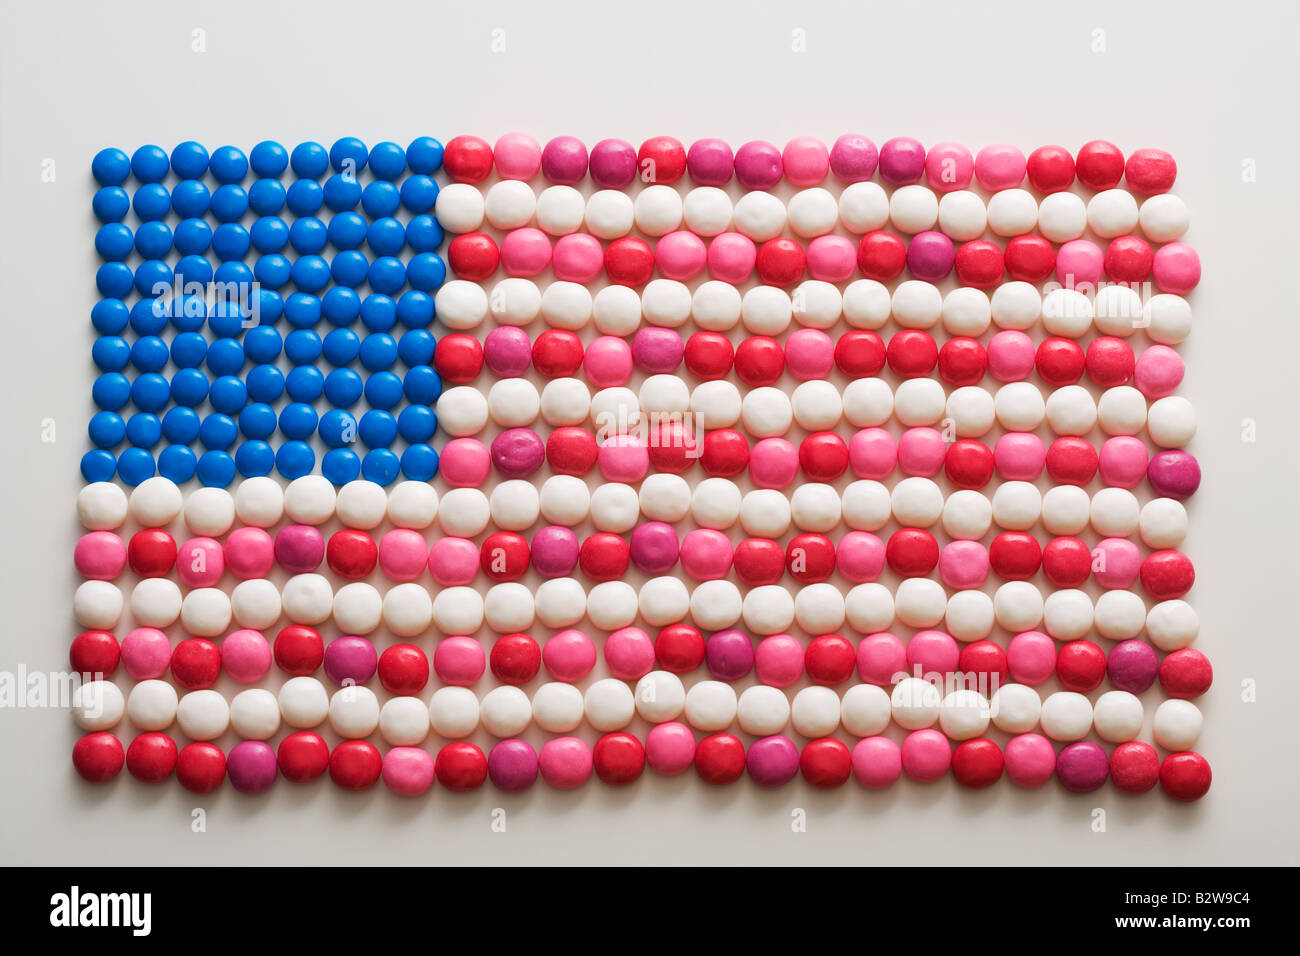 An american flag made out of sweets Stock Photo